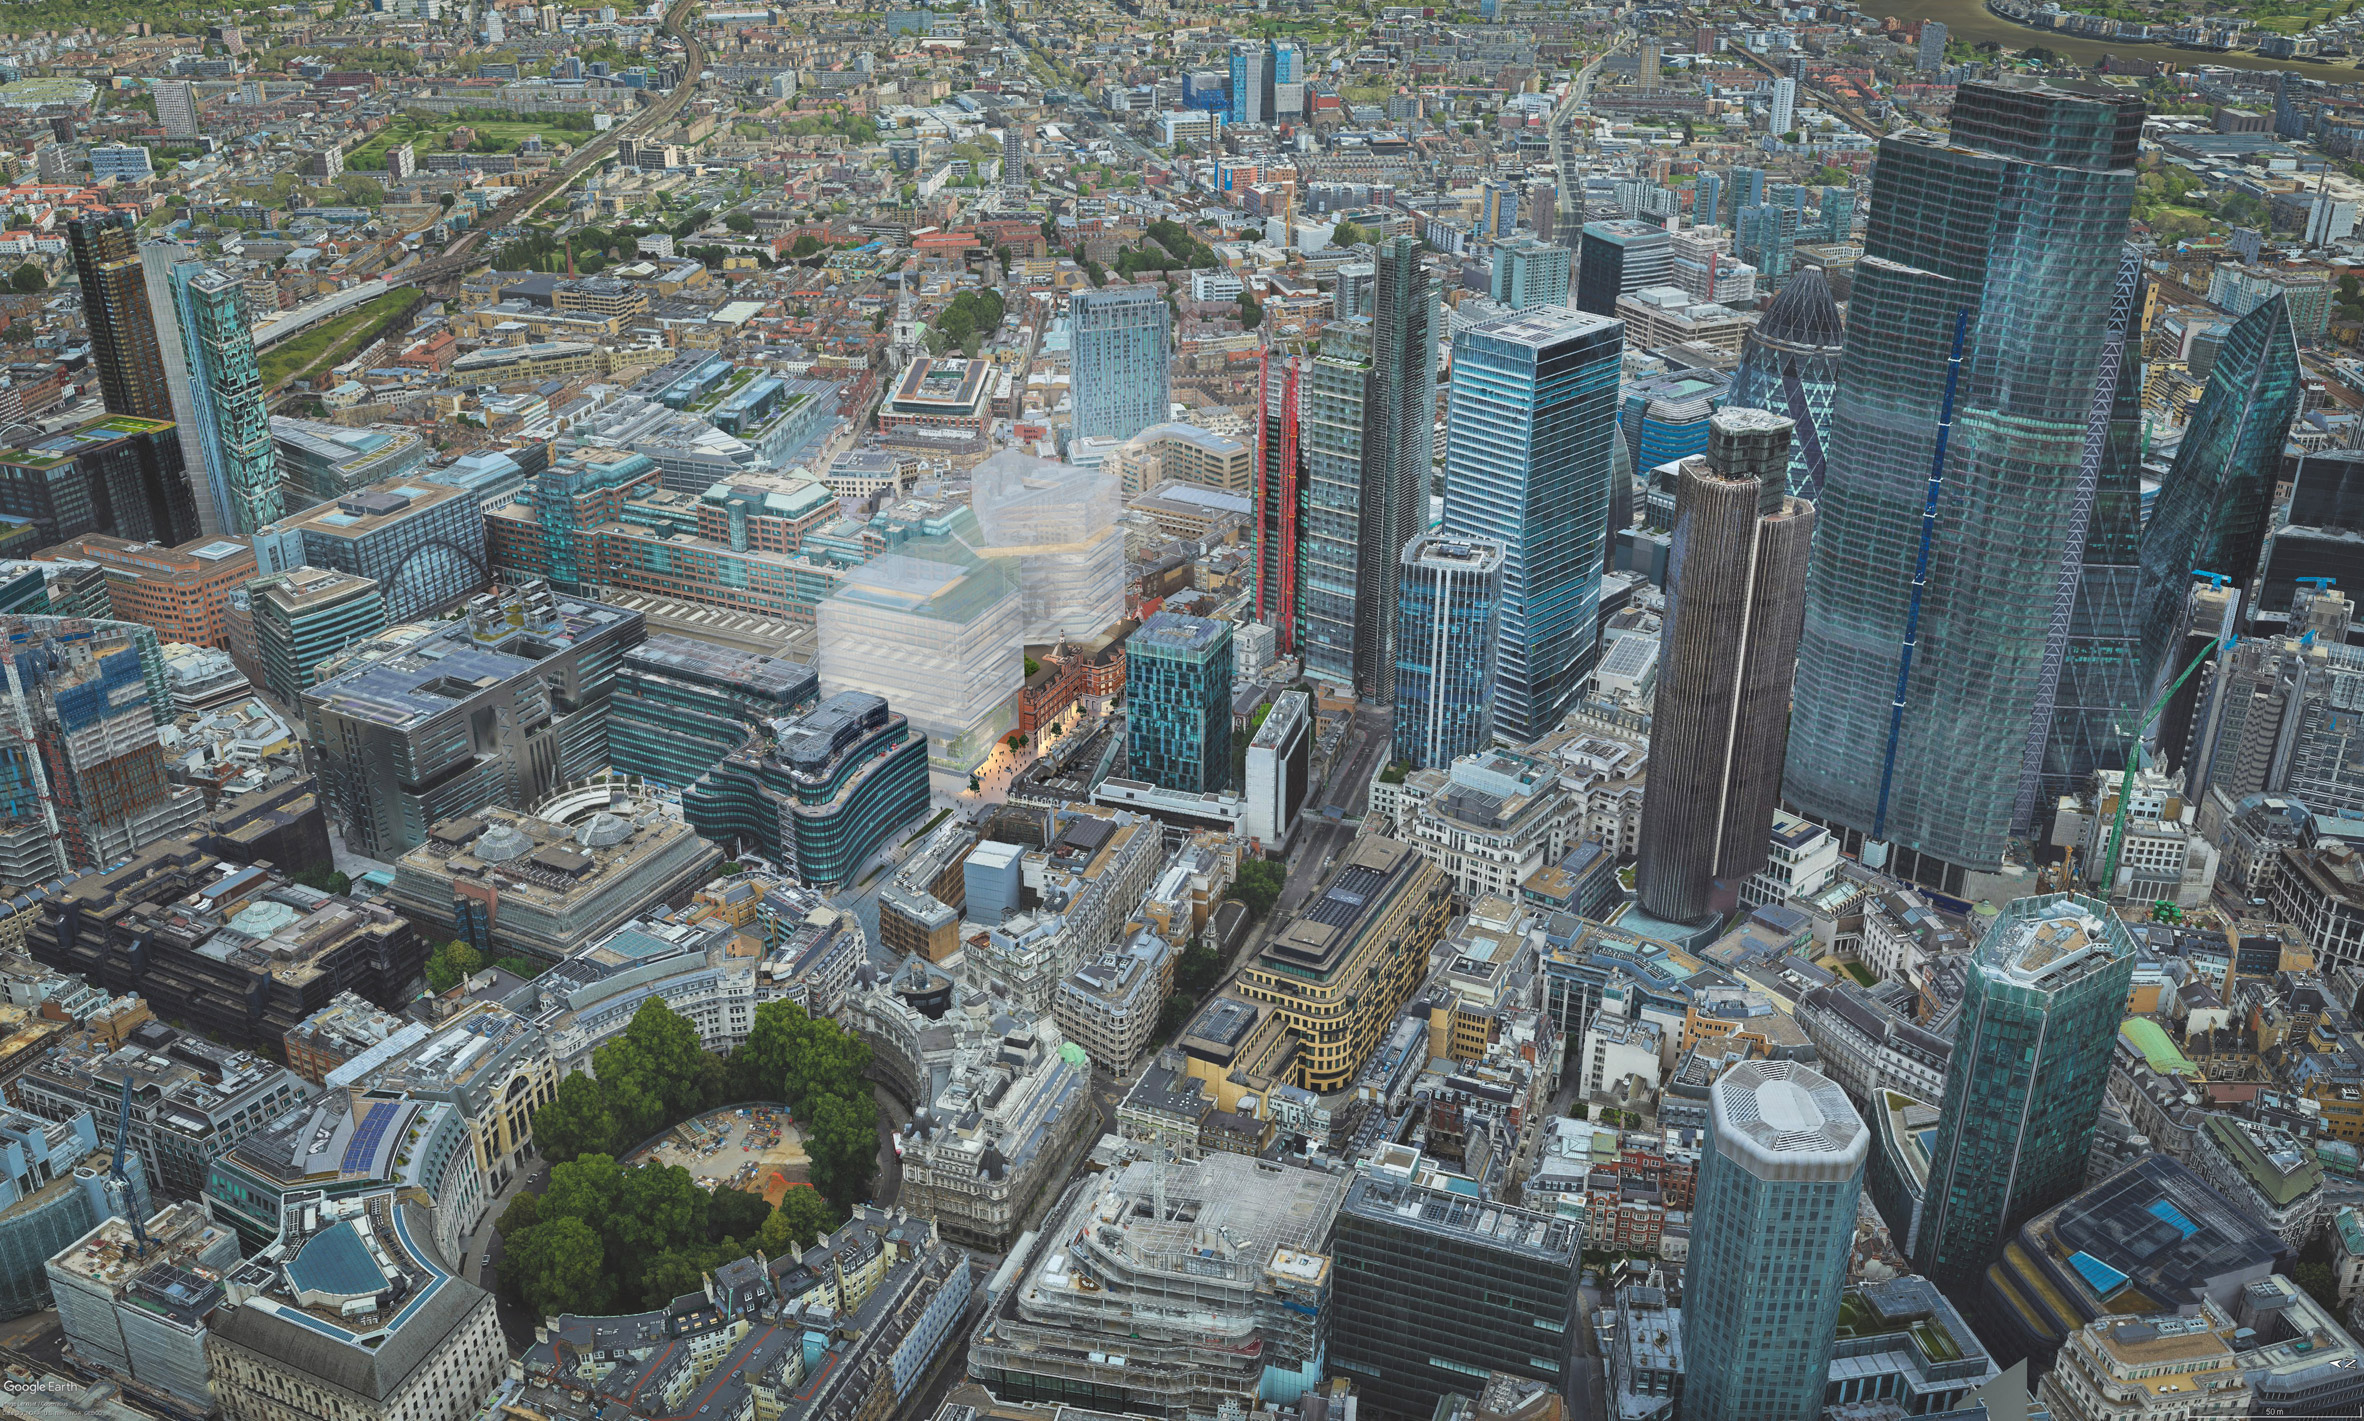 Aerial render of the proposed Liverpool Street station redevelopment